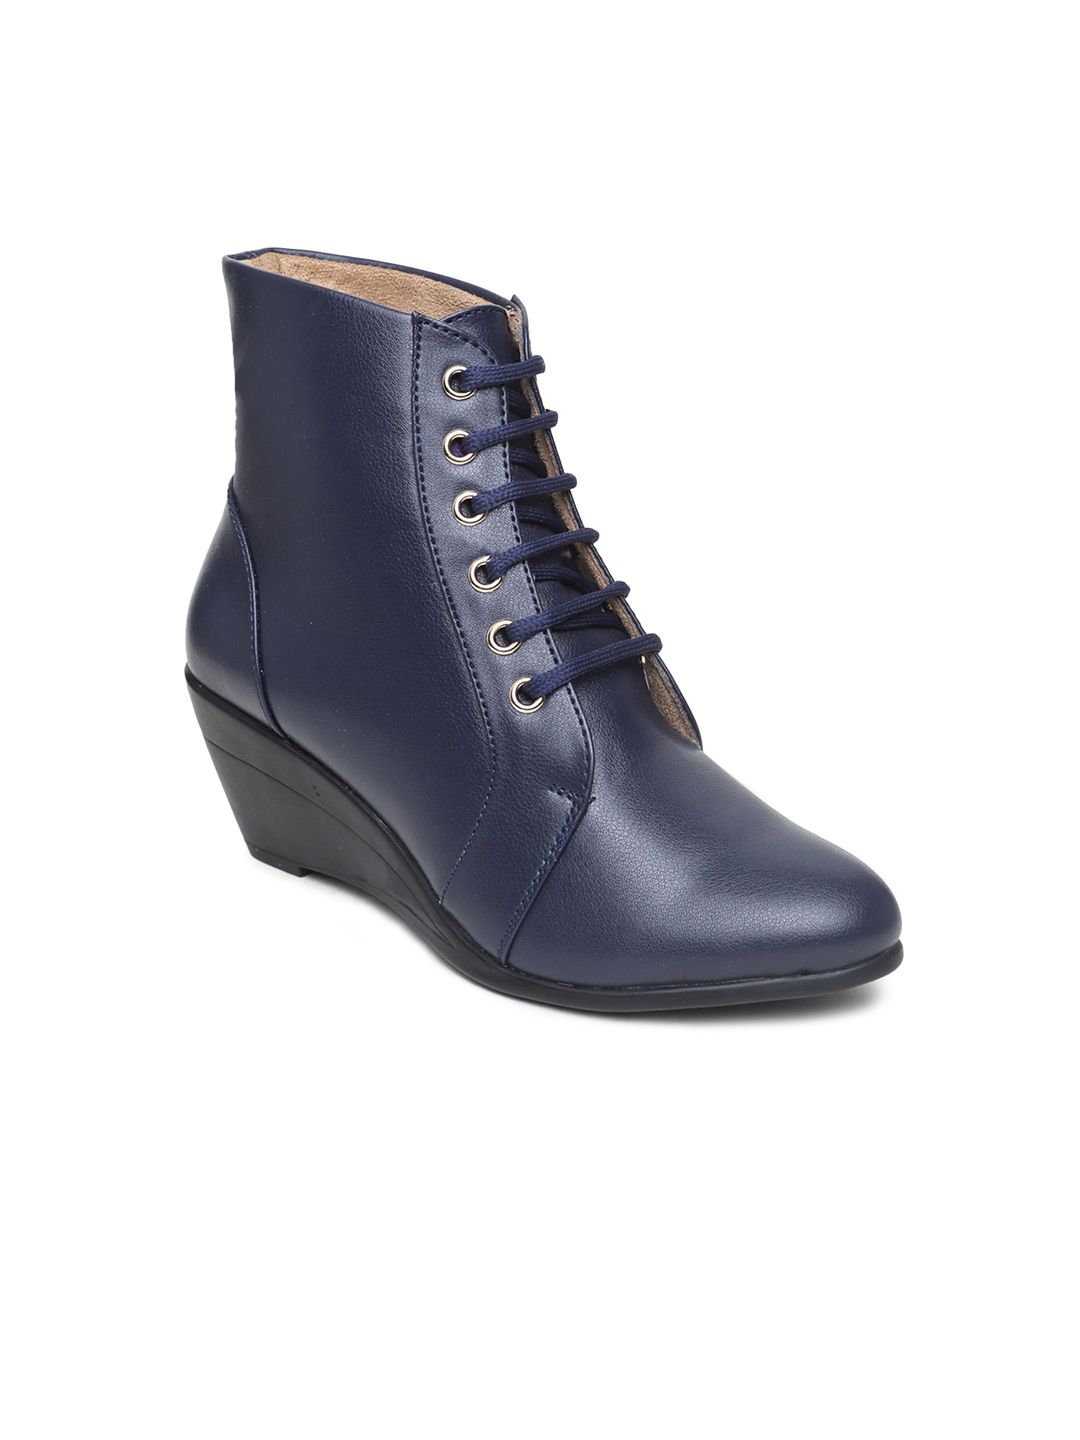 VALIOSAA Navy Blue High-Top Wedge Heeled Boots Price in India